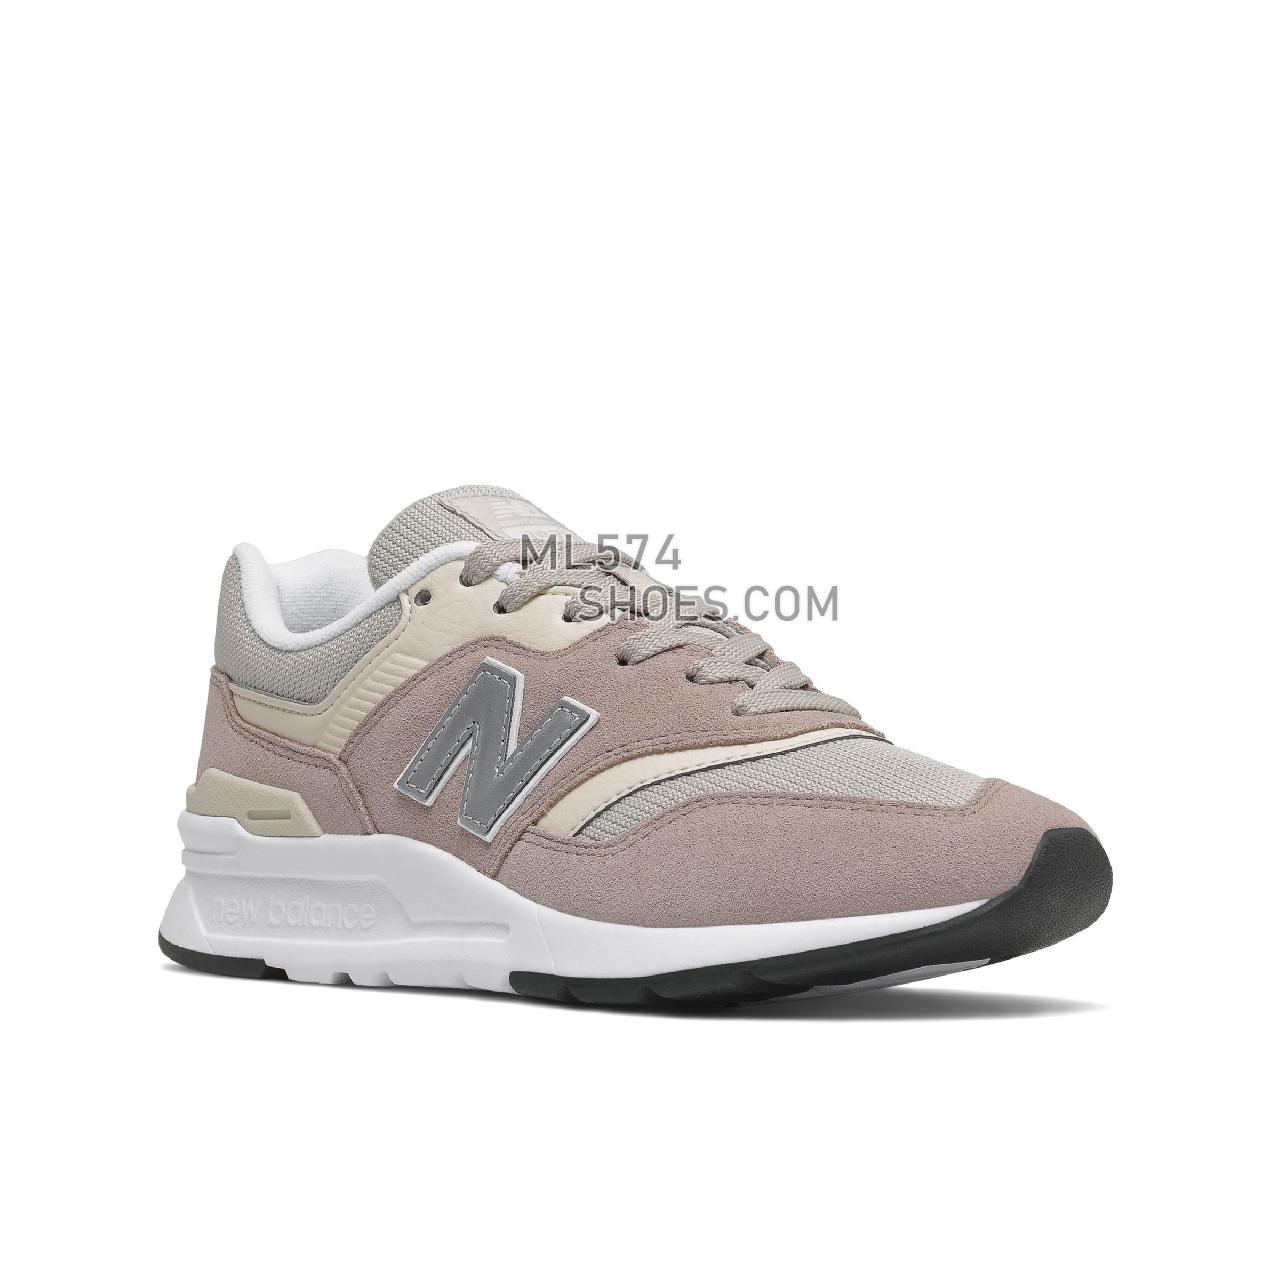 New Balance 997H - Women's Classic Sneakers - Au Lait with White - CW997HTM